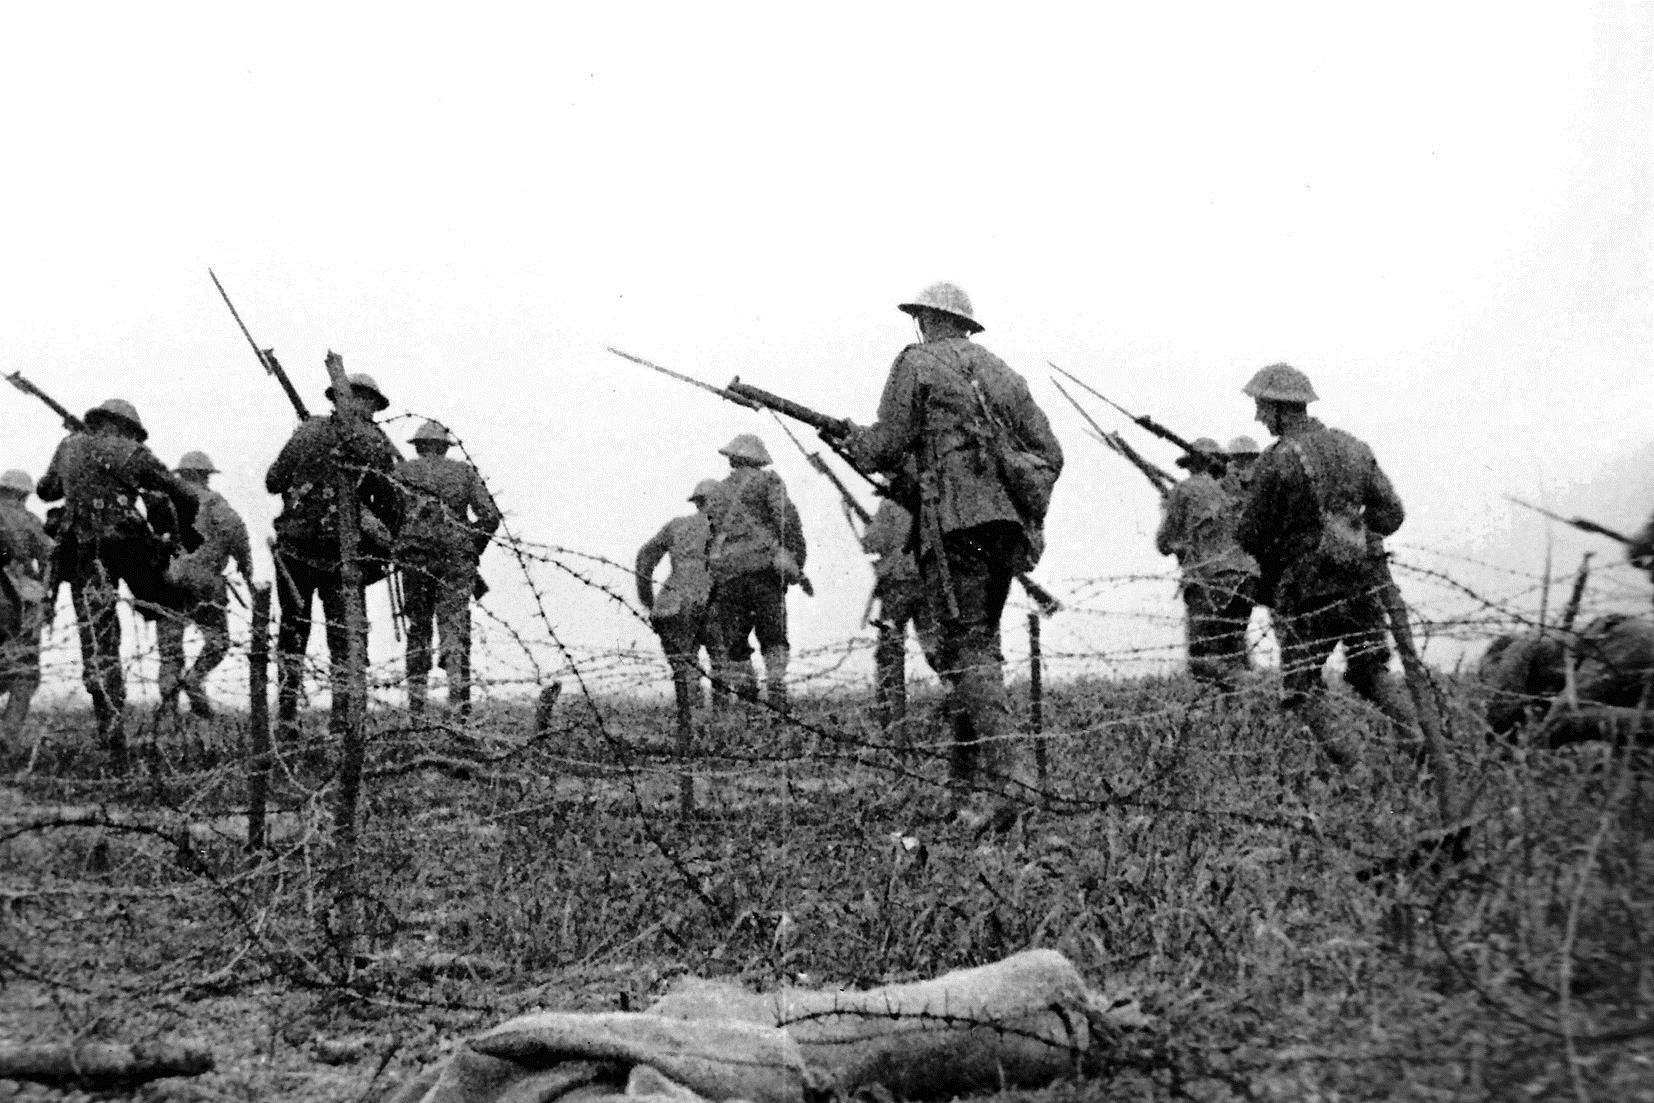 Soldiers on the Somme